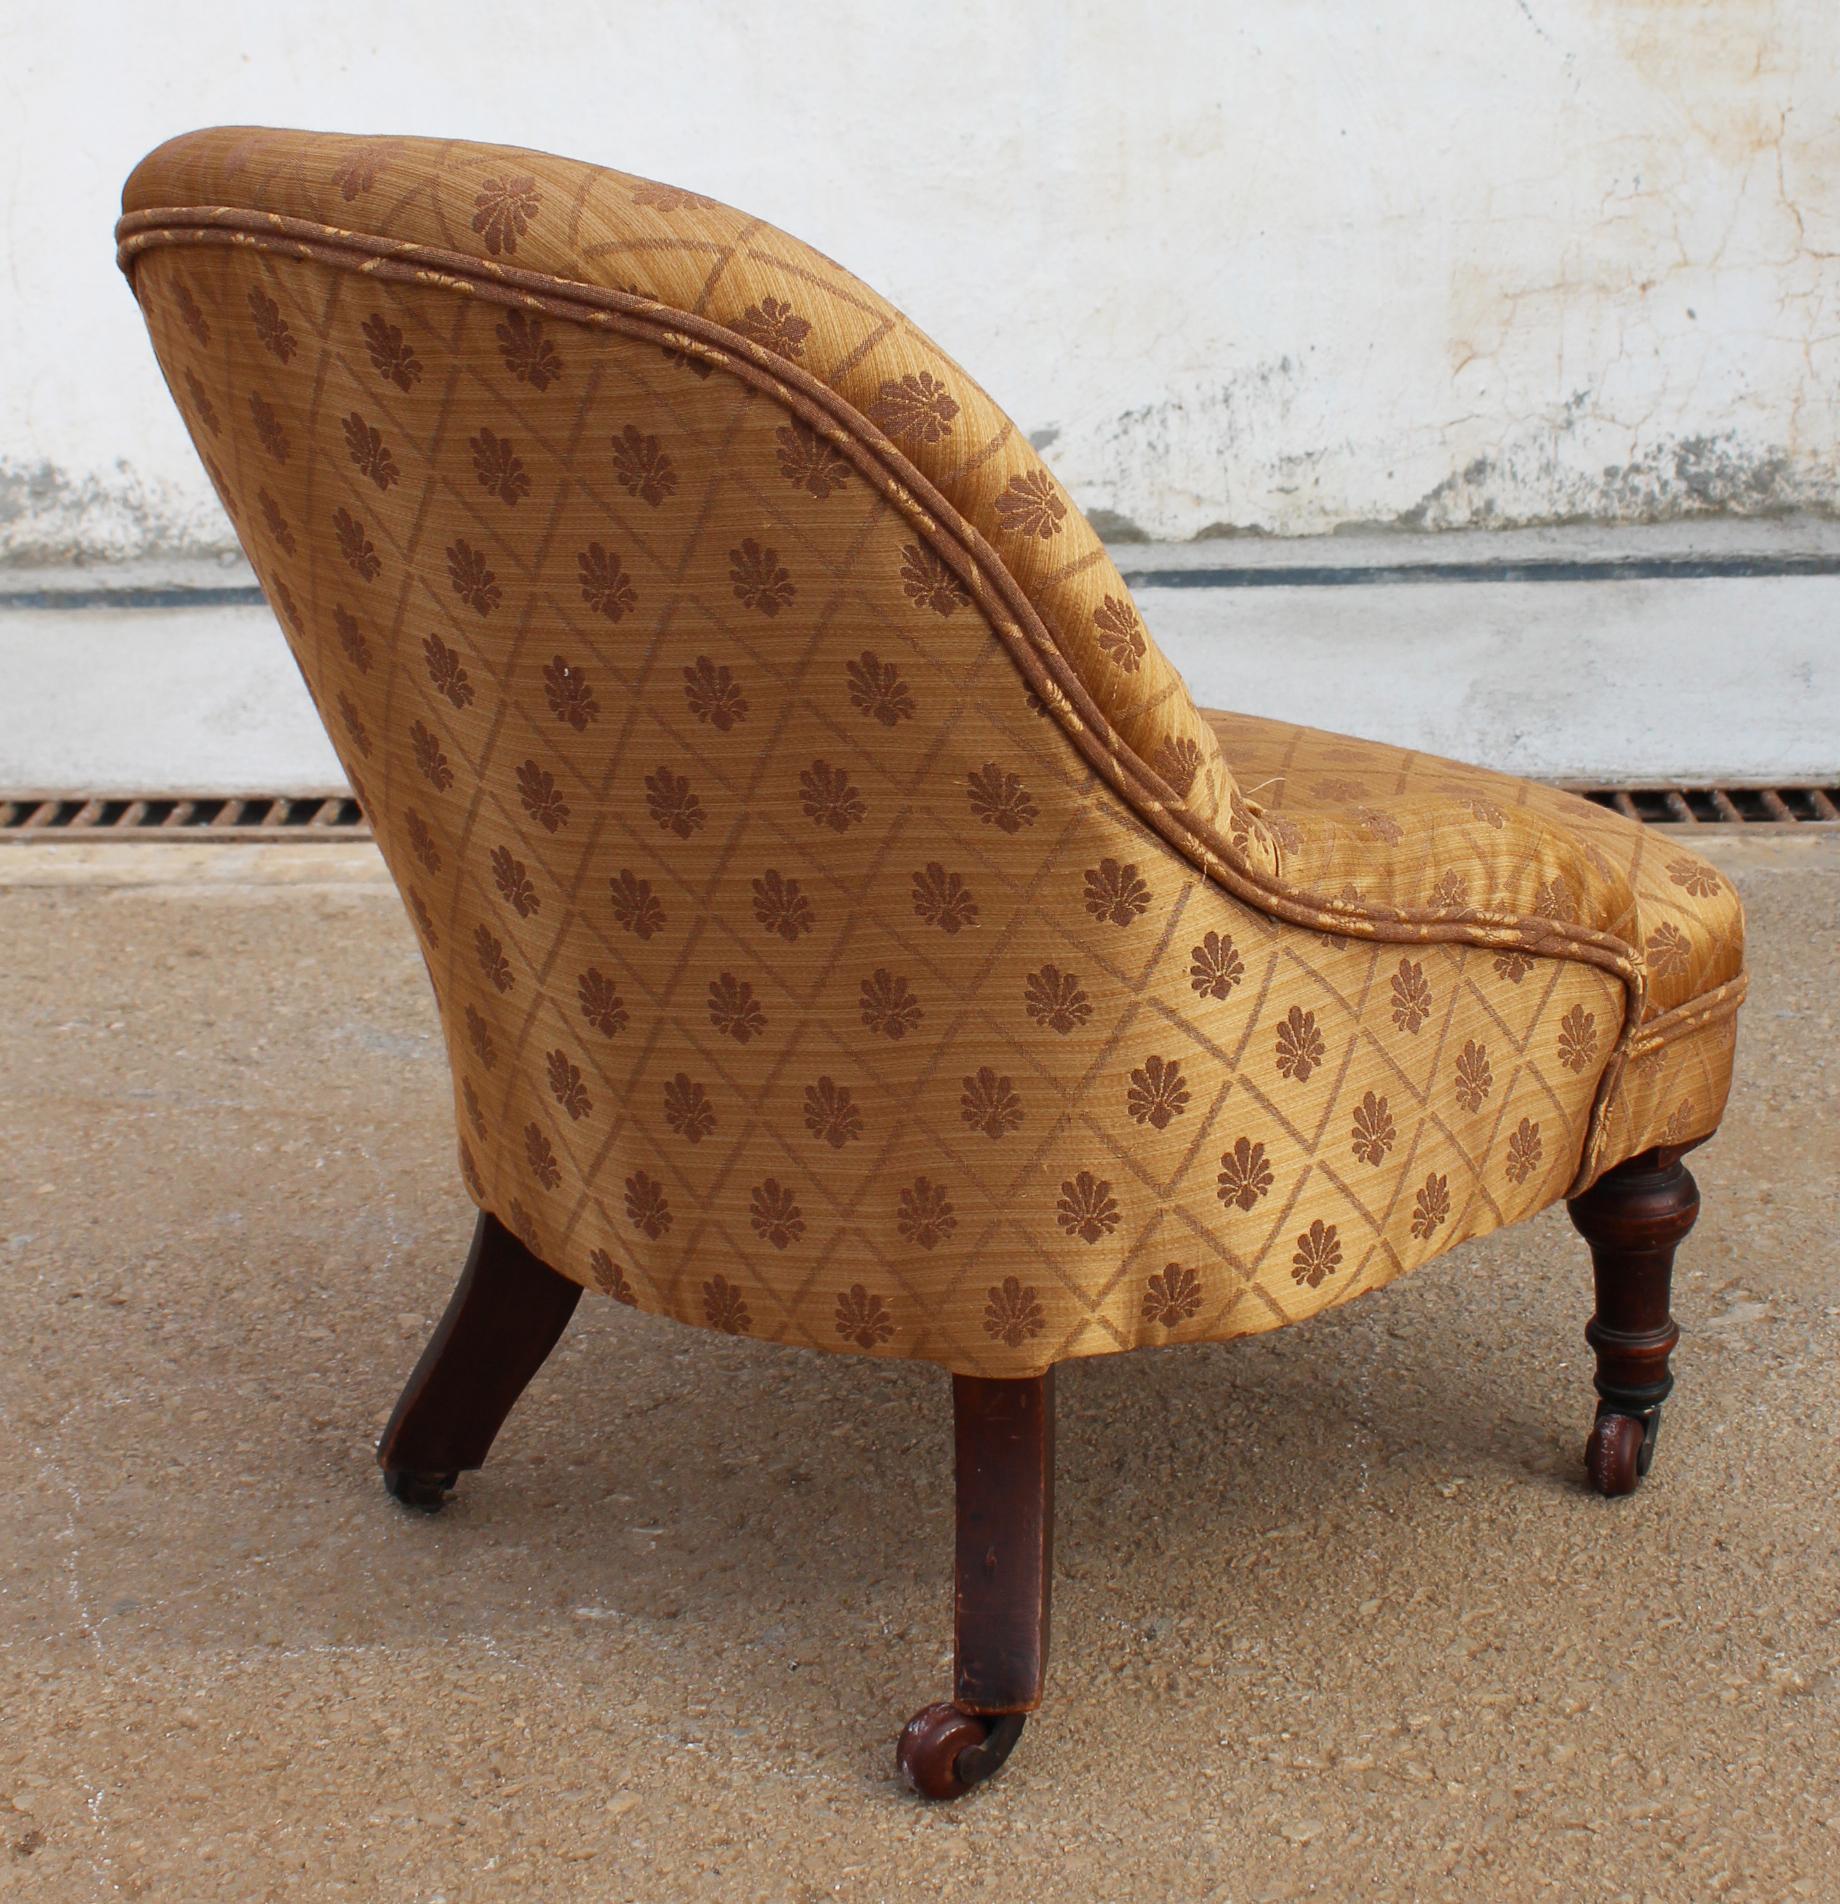 19th Century English Children's Chair with Mahogany Legs and Silk Upholstery For Sale 2